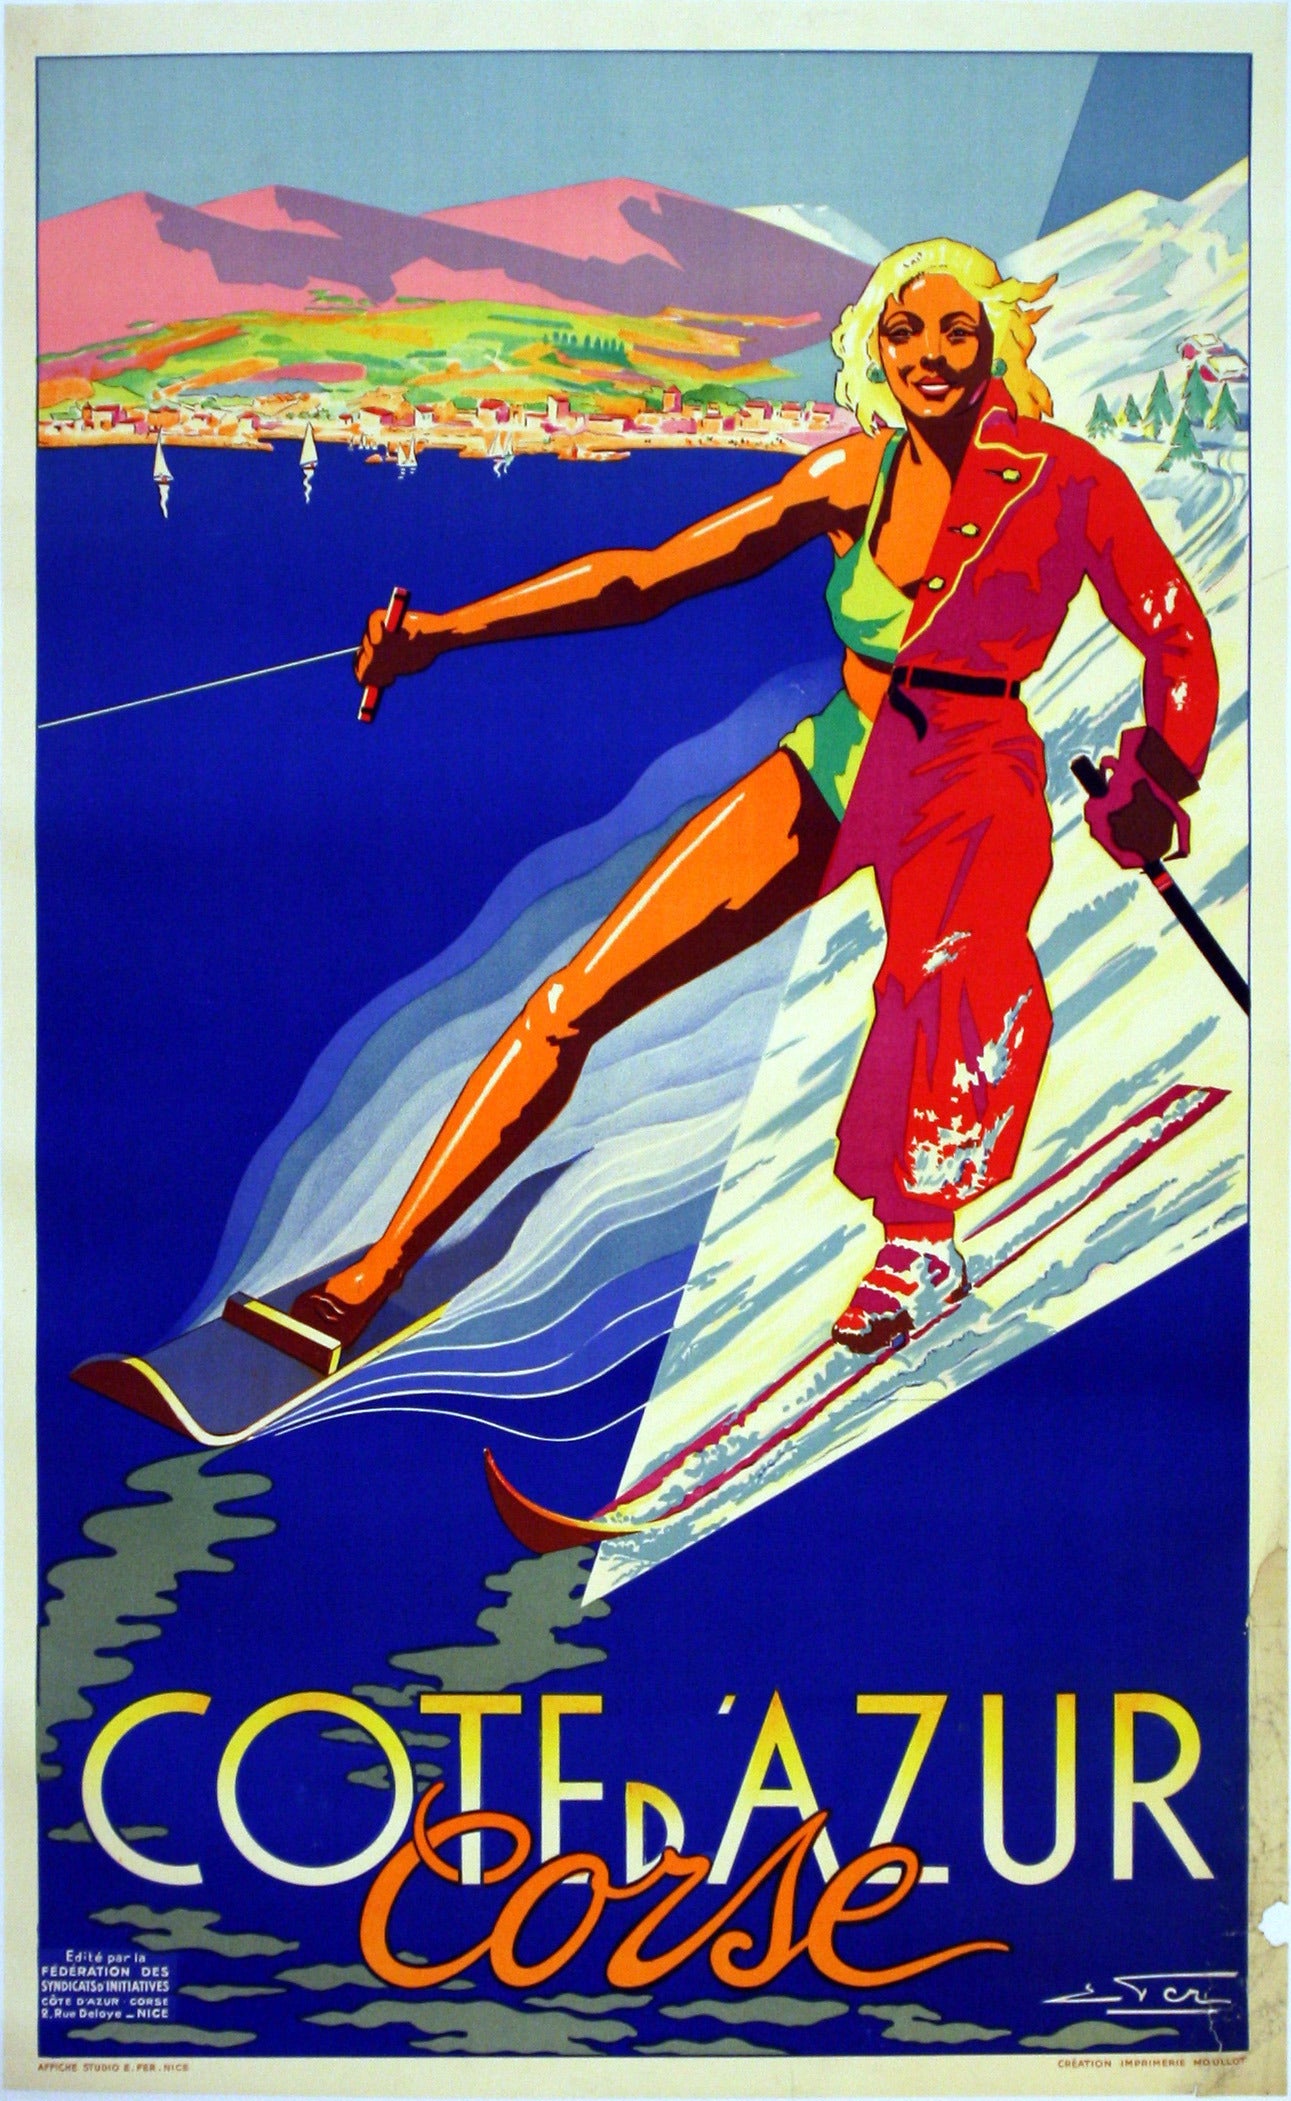 Original vintage 1930s poster for Cote d'Azur Corse featuring summer waterskiing and winter skiing sports